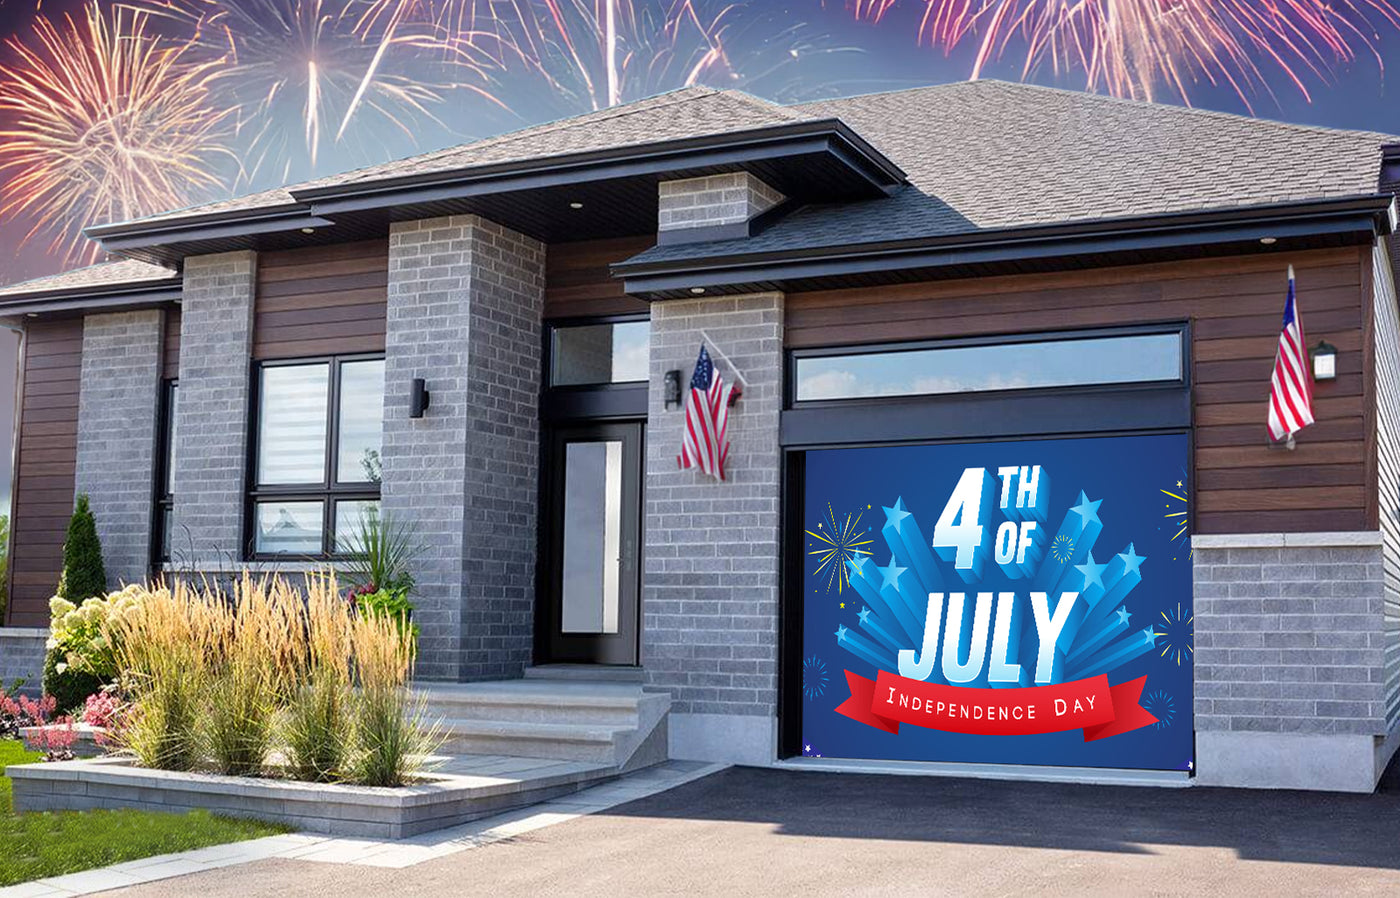 4th of July Fireworks Celebrations With USA Flag Garage Door Cover Banner